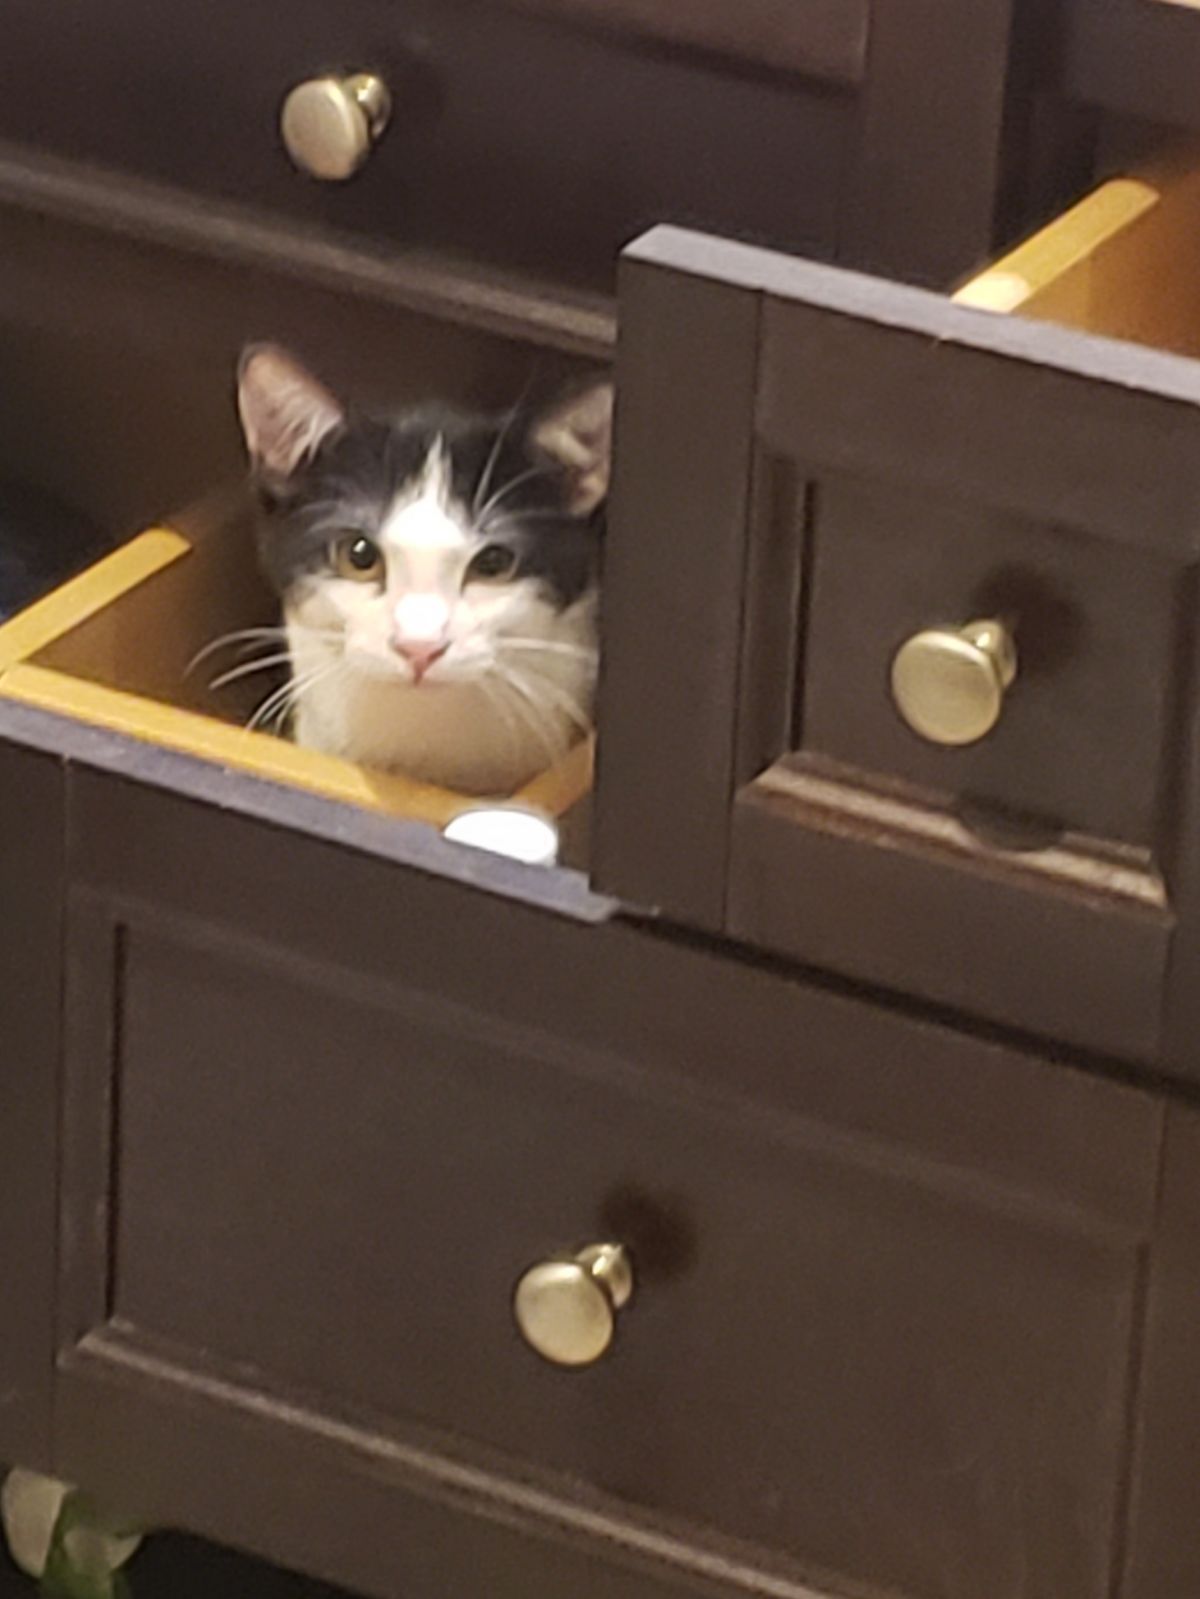 black and white cat sits inside a dresser drawer.